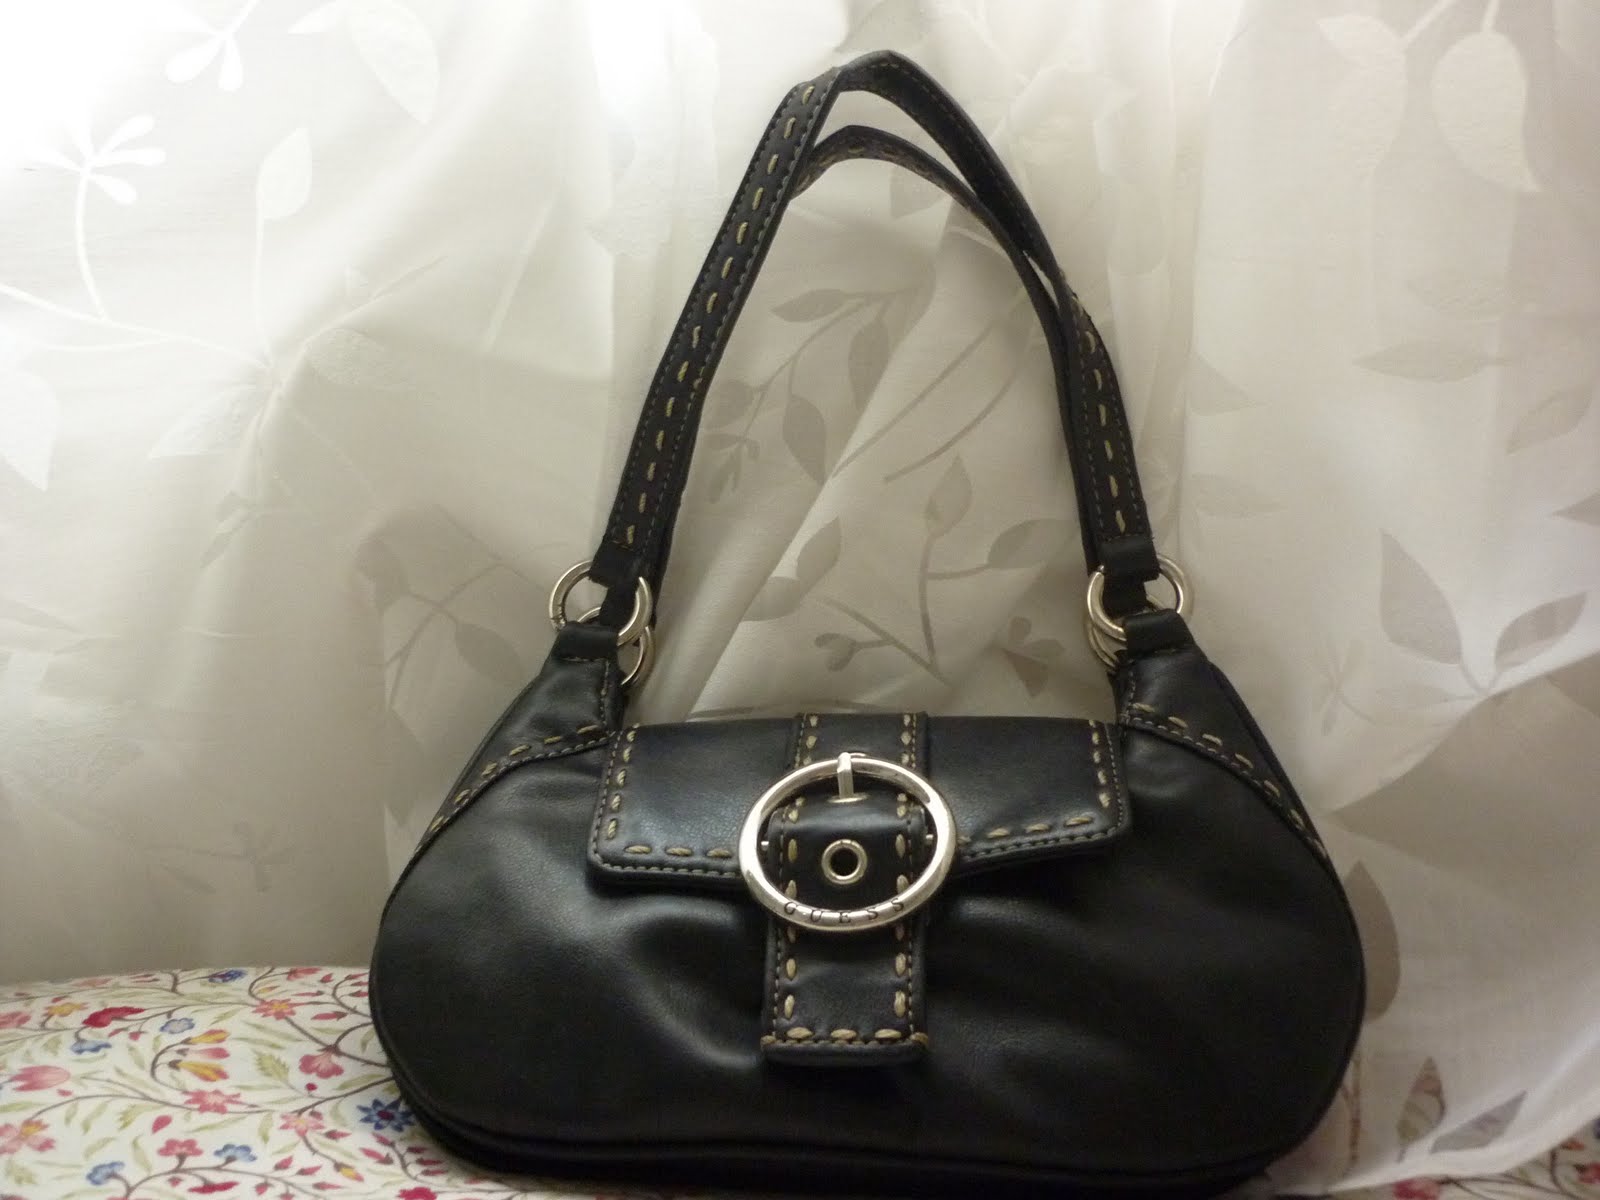 Little Orchid One Stop Online Shopping: Pre Loved Handbags